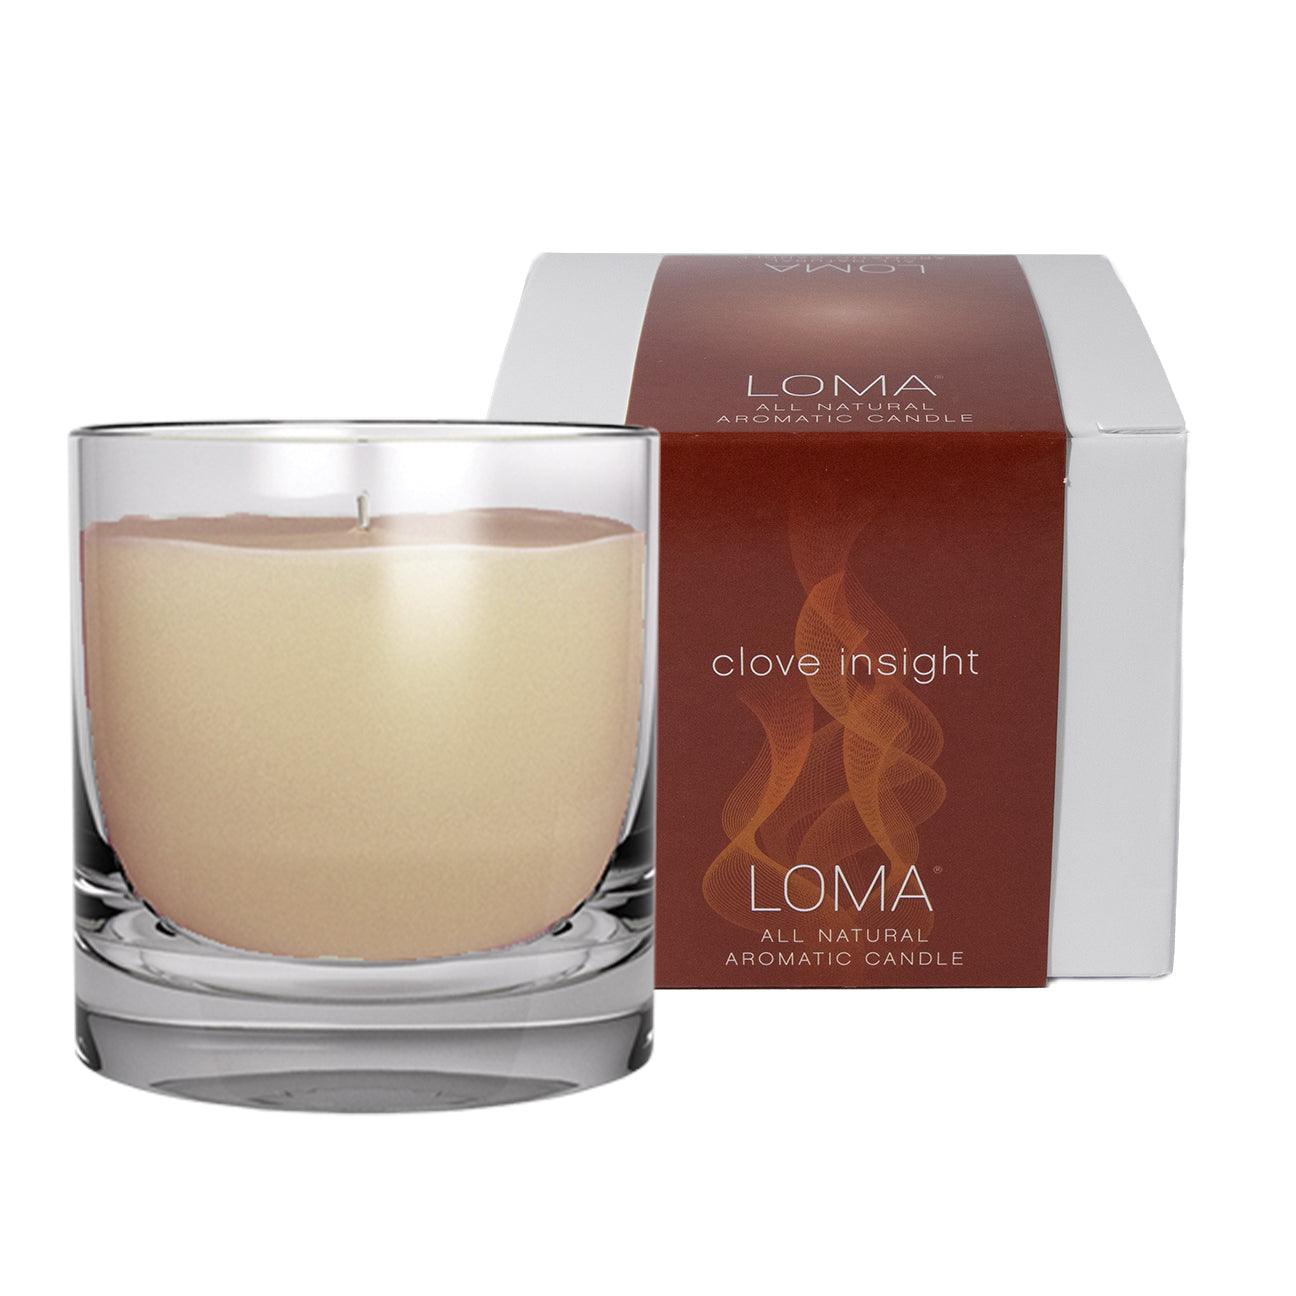 Clove Insight Candle - Loma Hair and Body Care